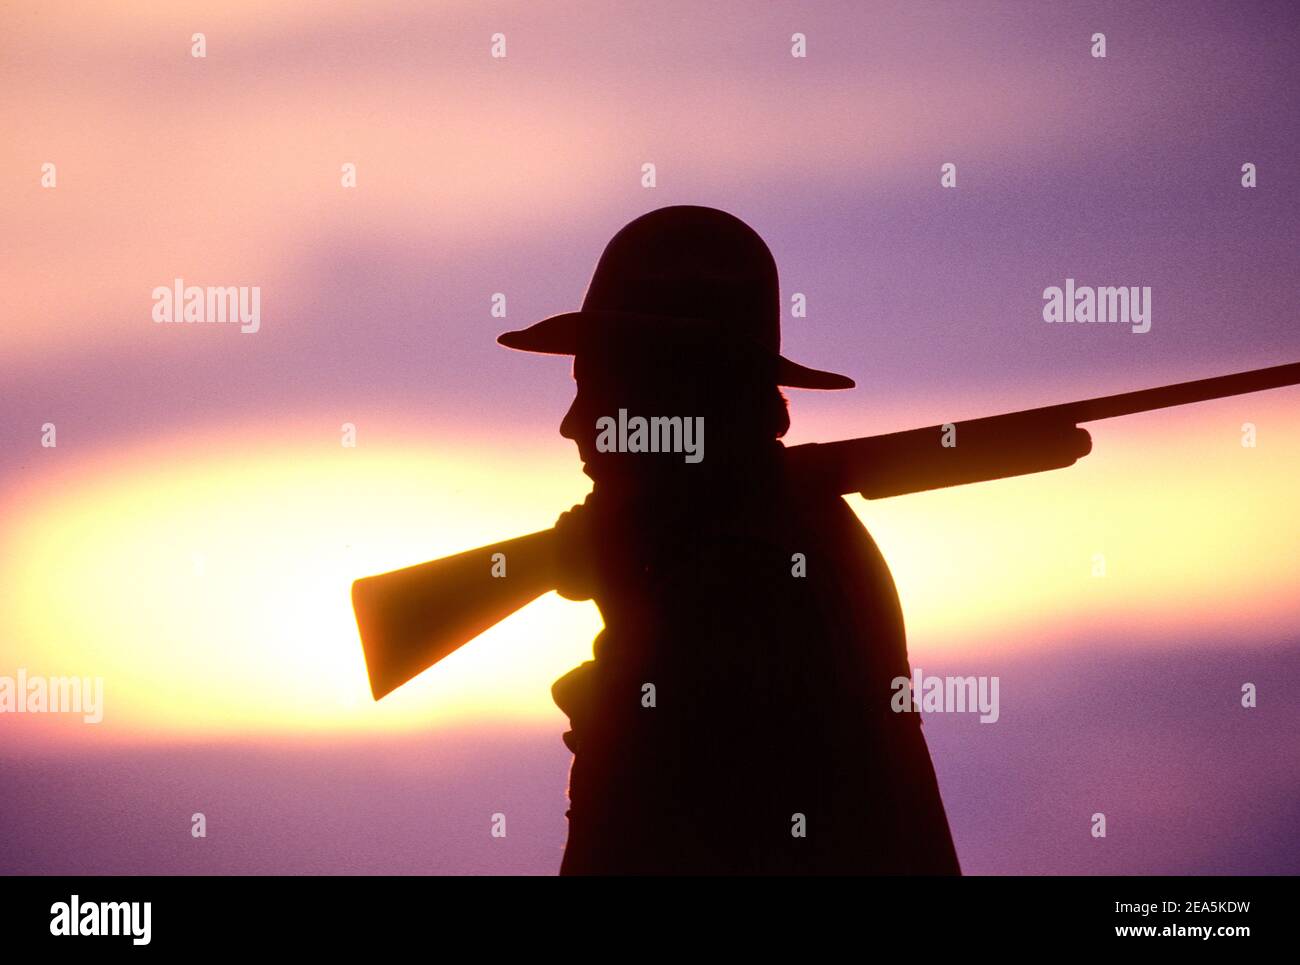 Silhouette of a man holding a shotgun at sunset Stock Photo